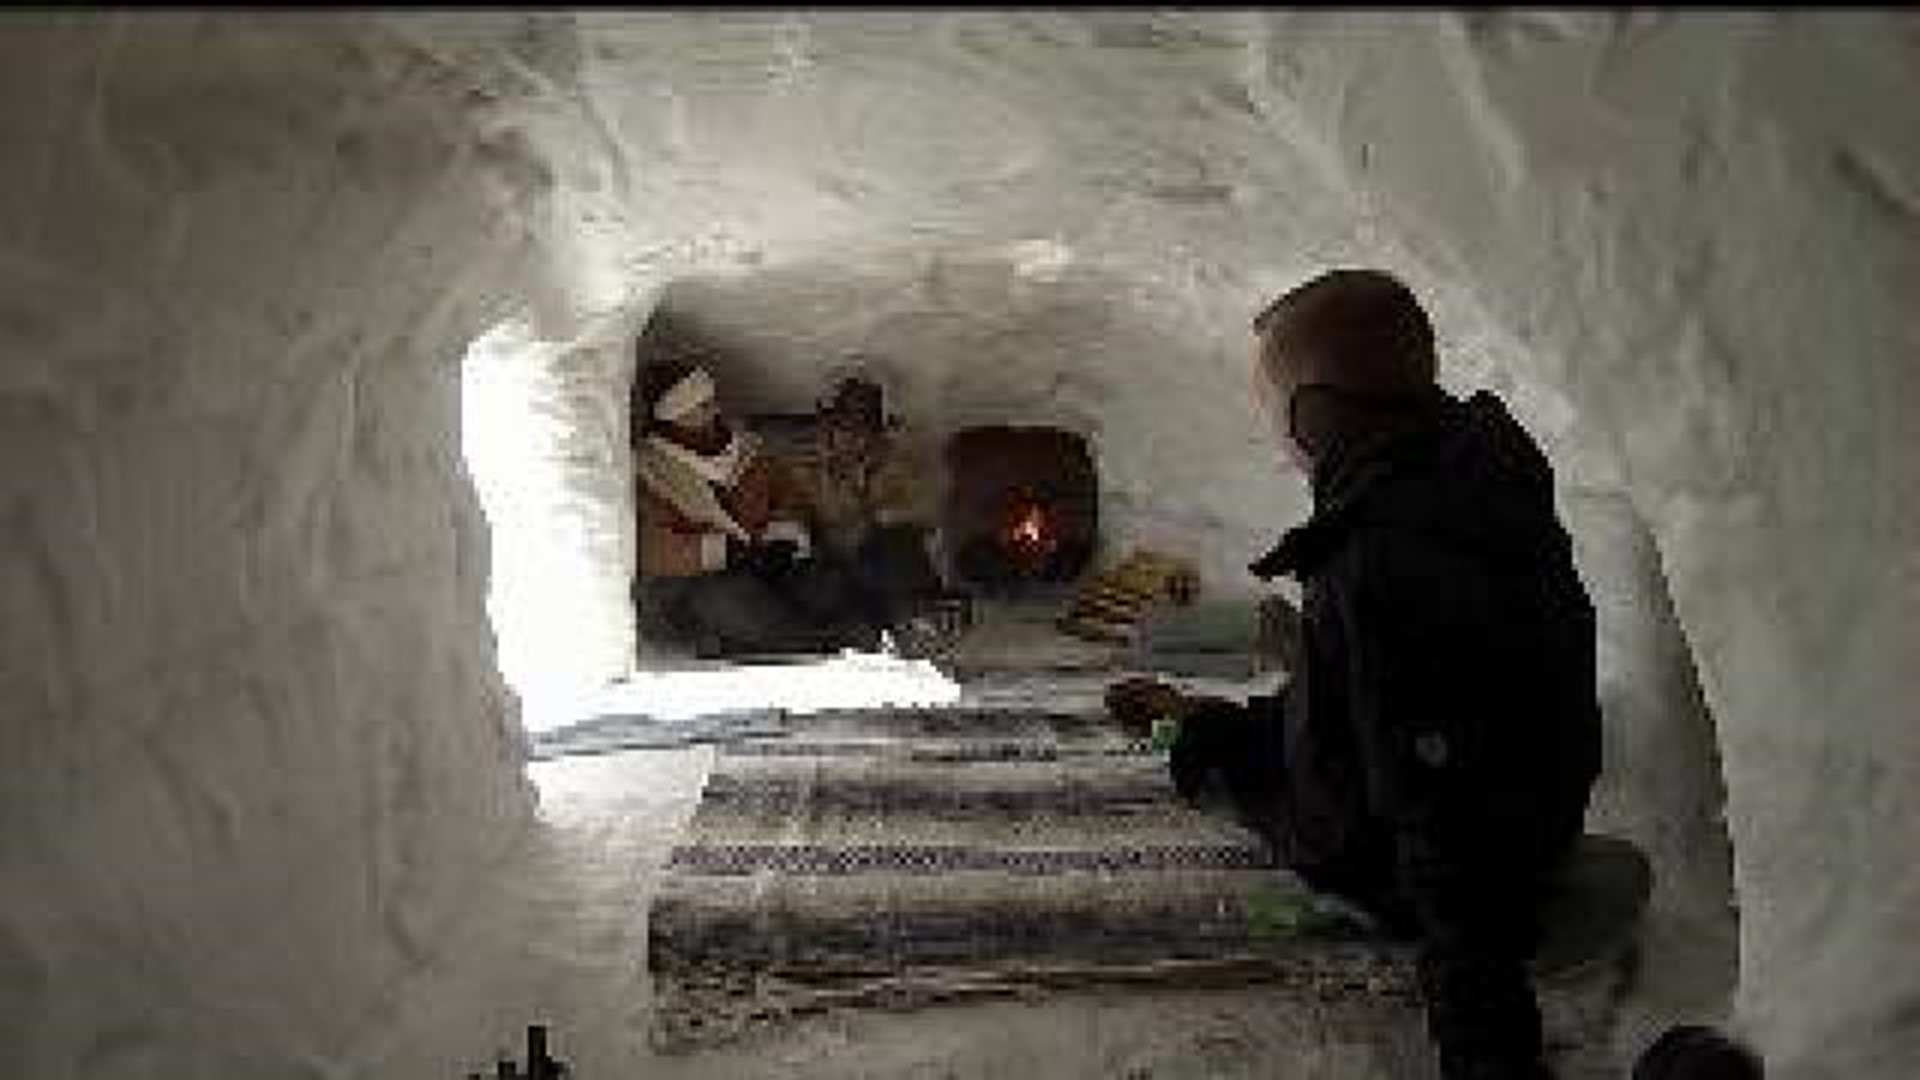 Couple builds igloo with comforts of home